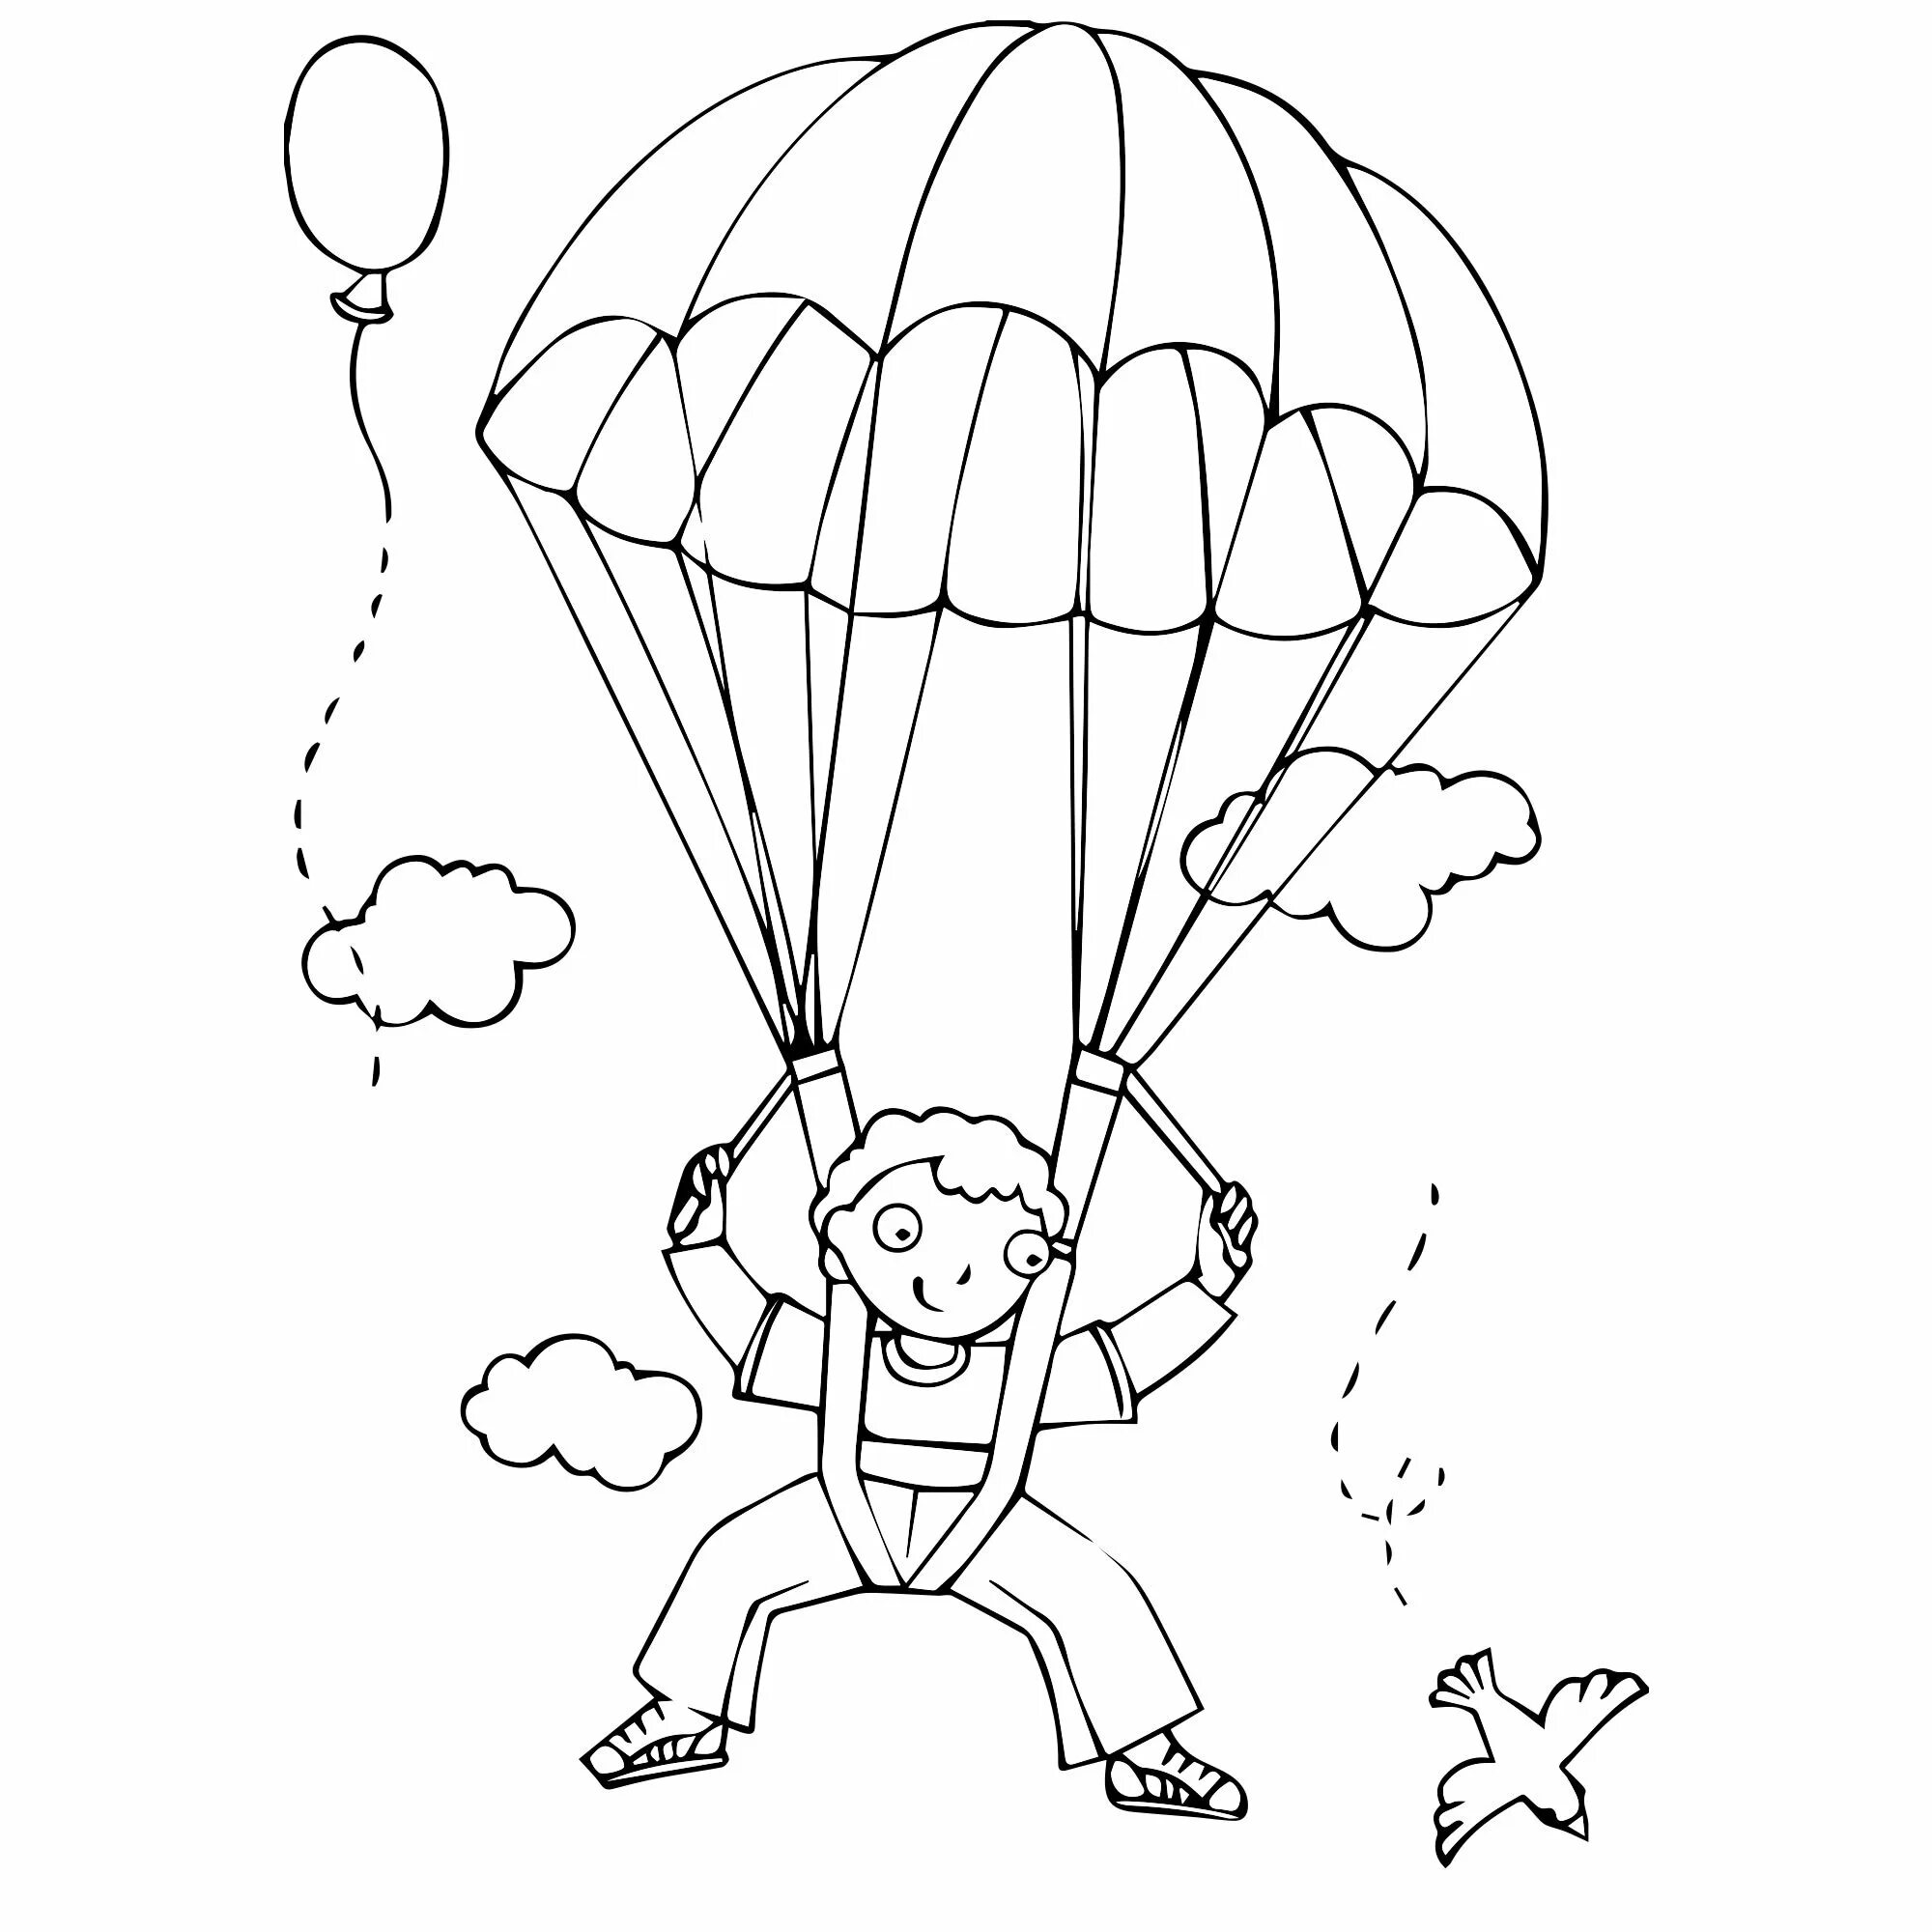 Awesome skydiver coloring page